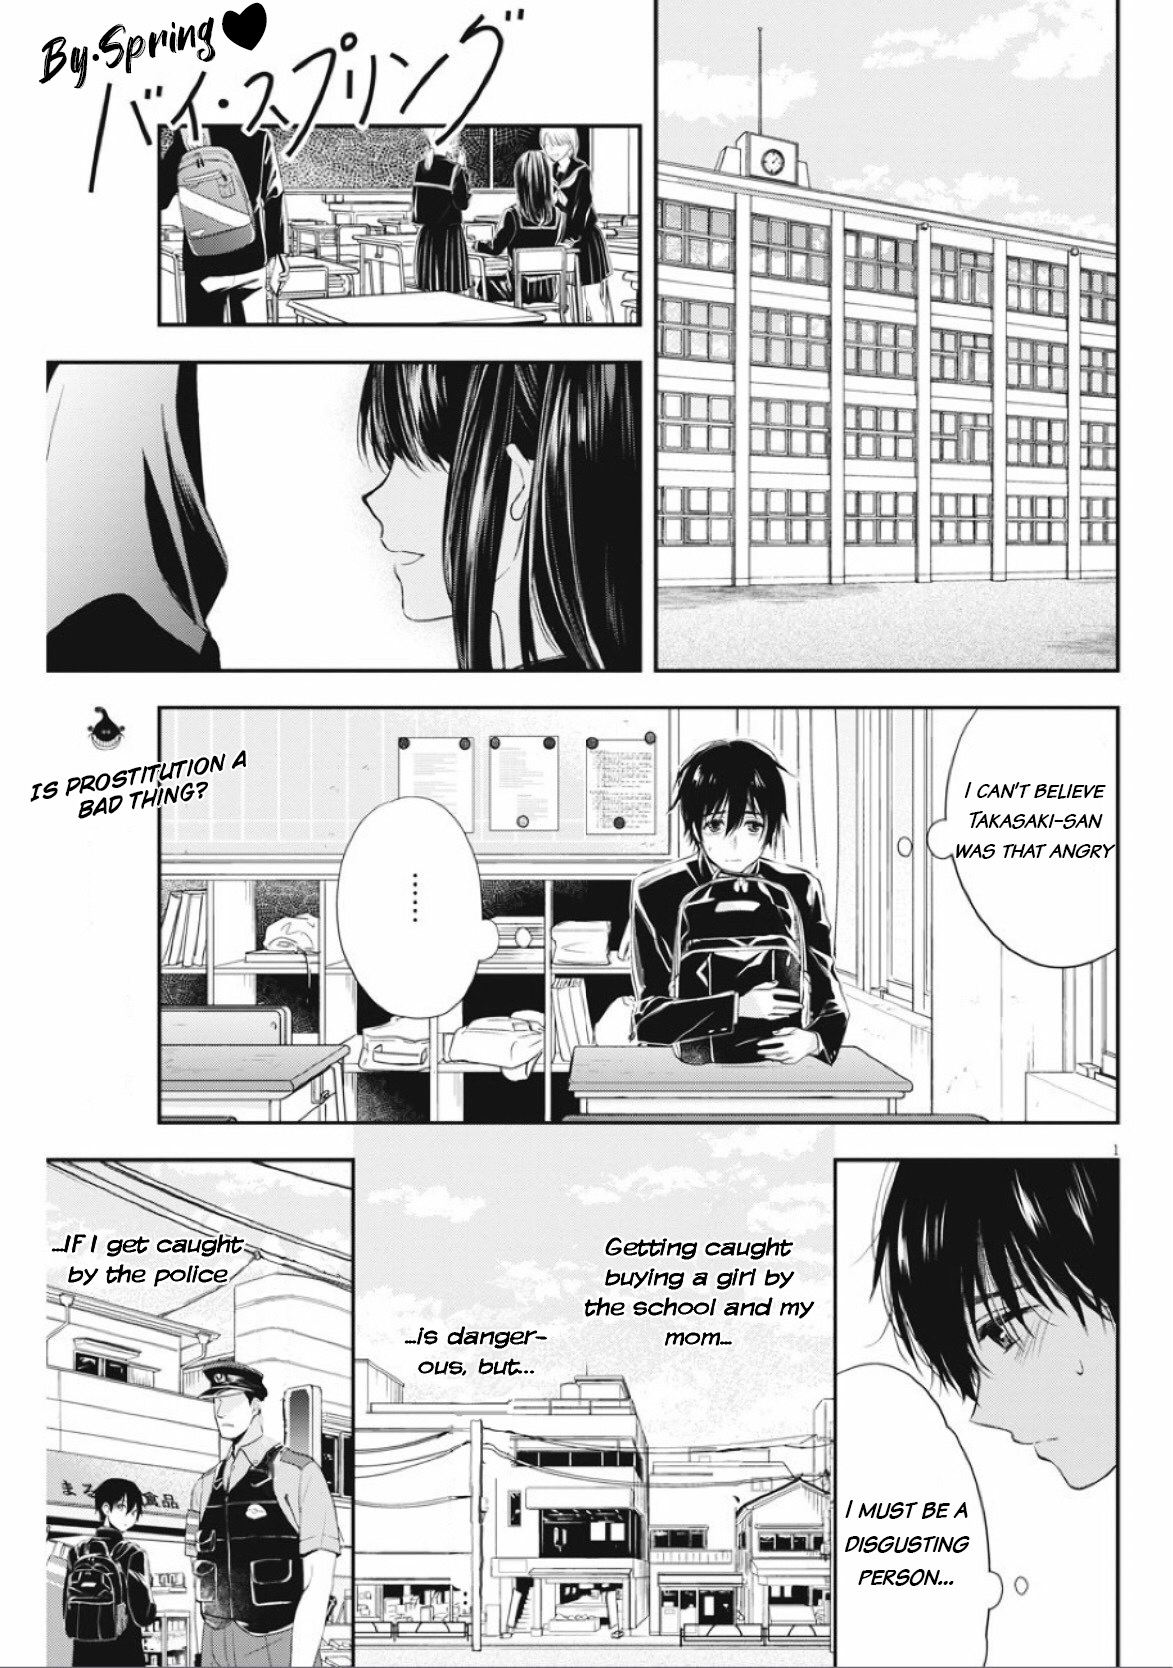 By Spring Vol. 1 Ch. 6 If you give me money